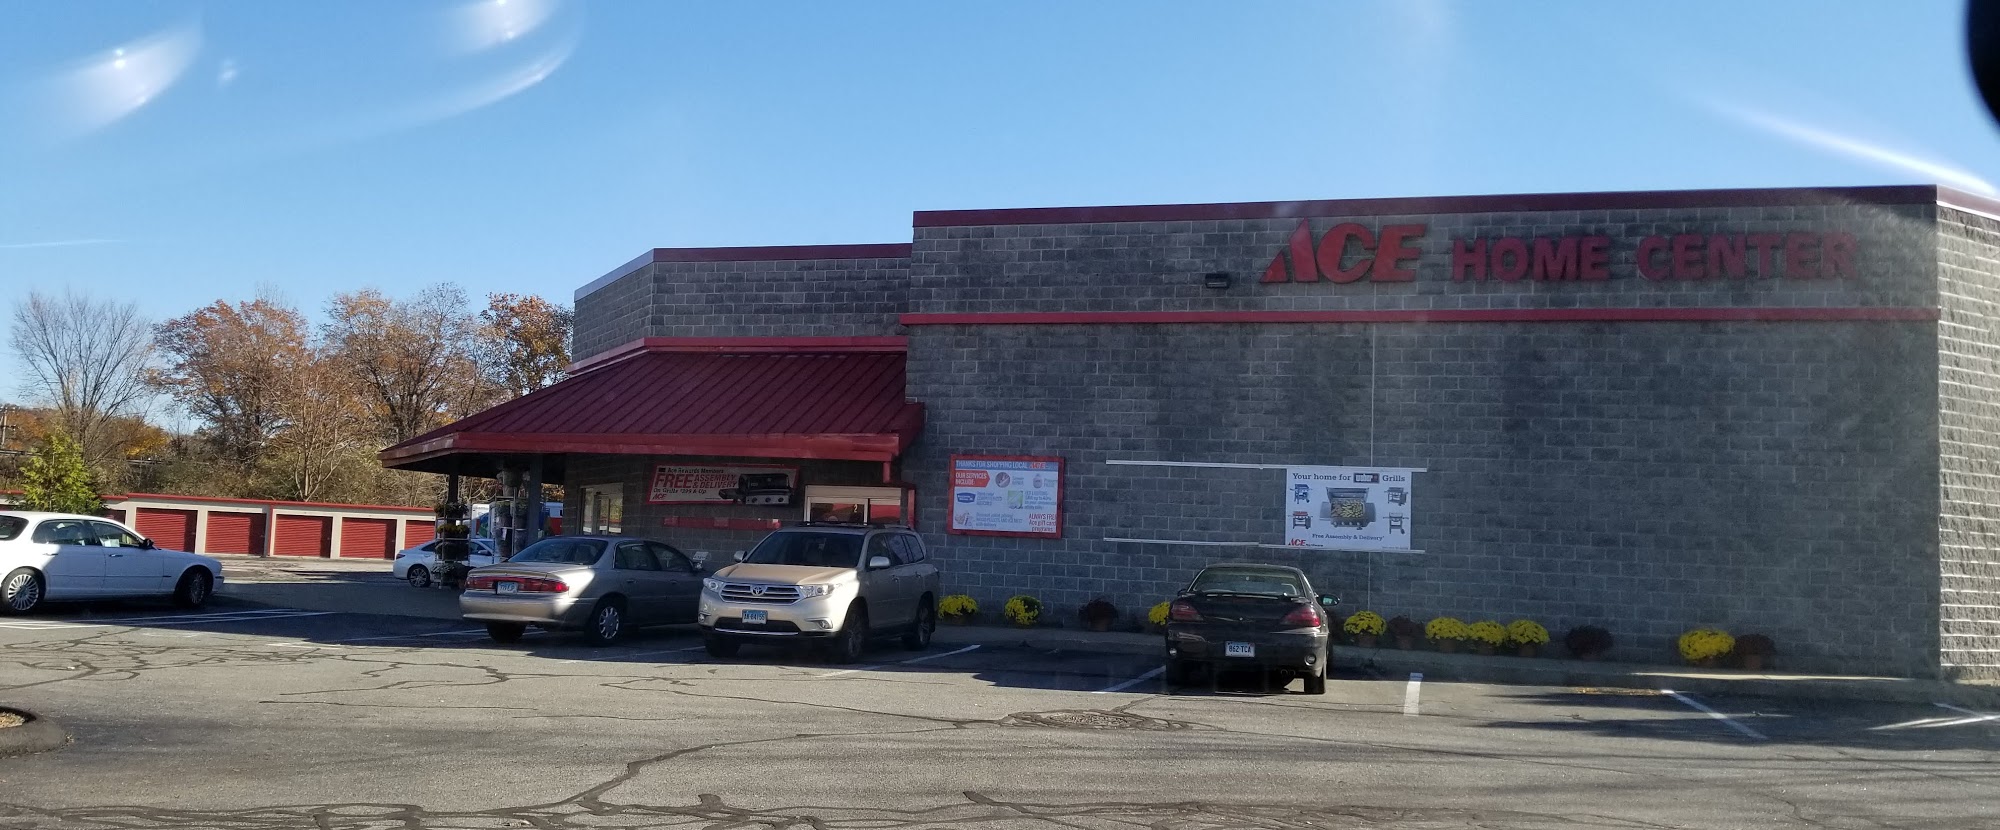 Ace Hardware of Norwich